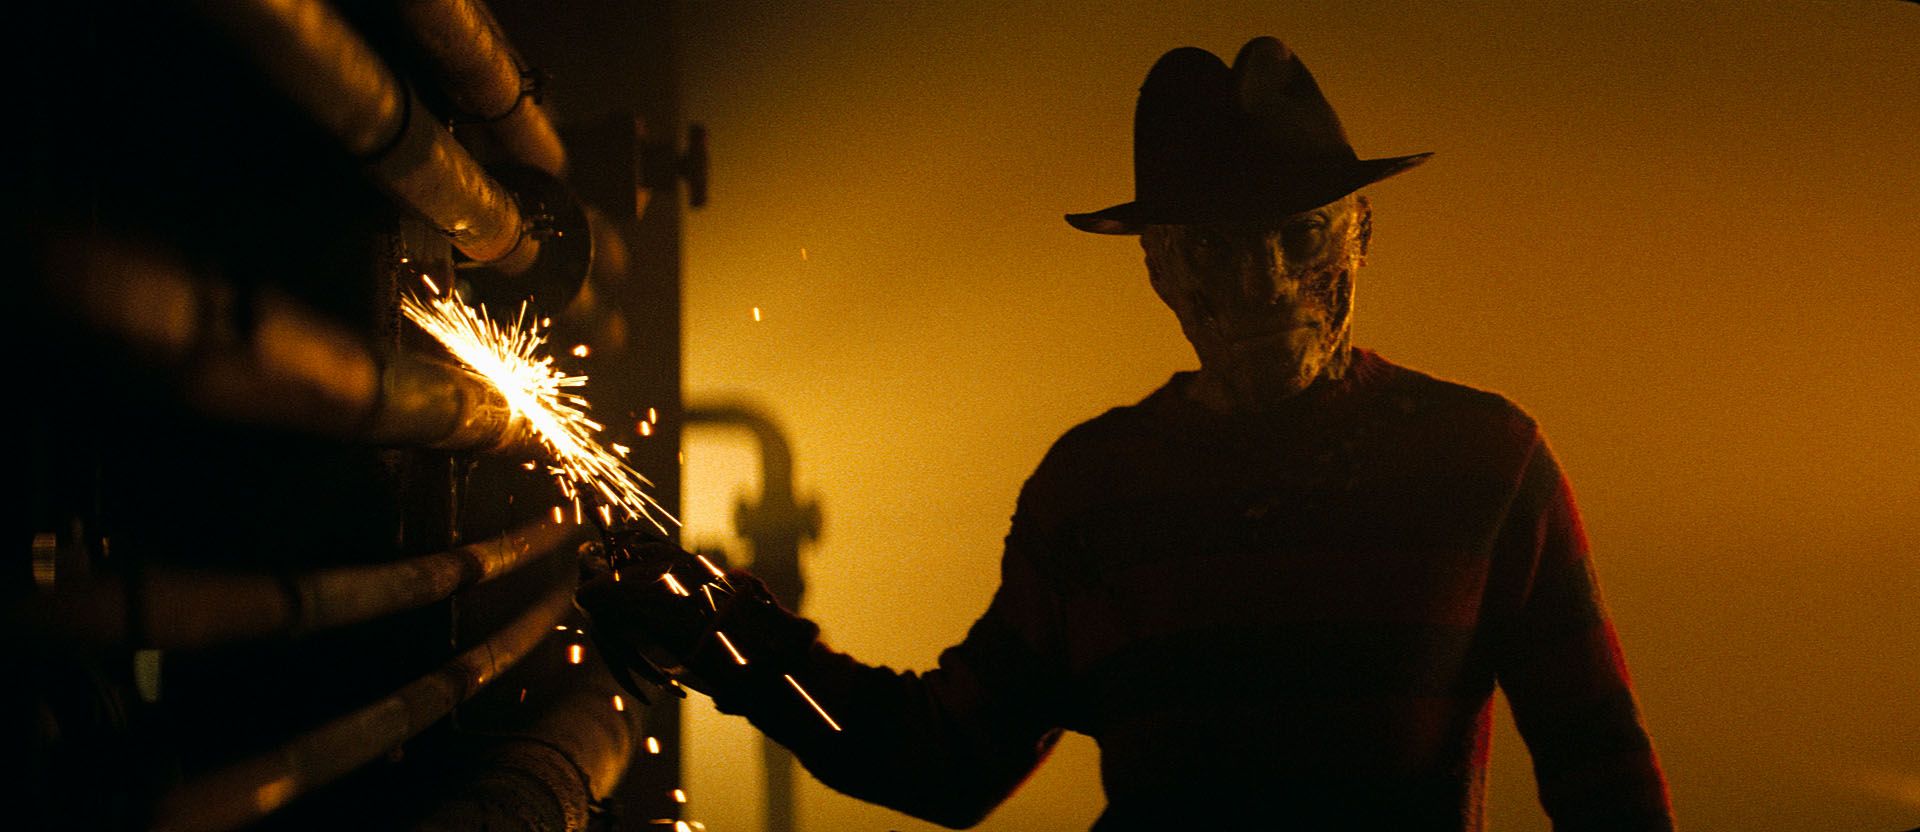 Tons of New Images from A NIGHTMARE ON ELM STREET Plus the Production